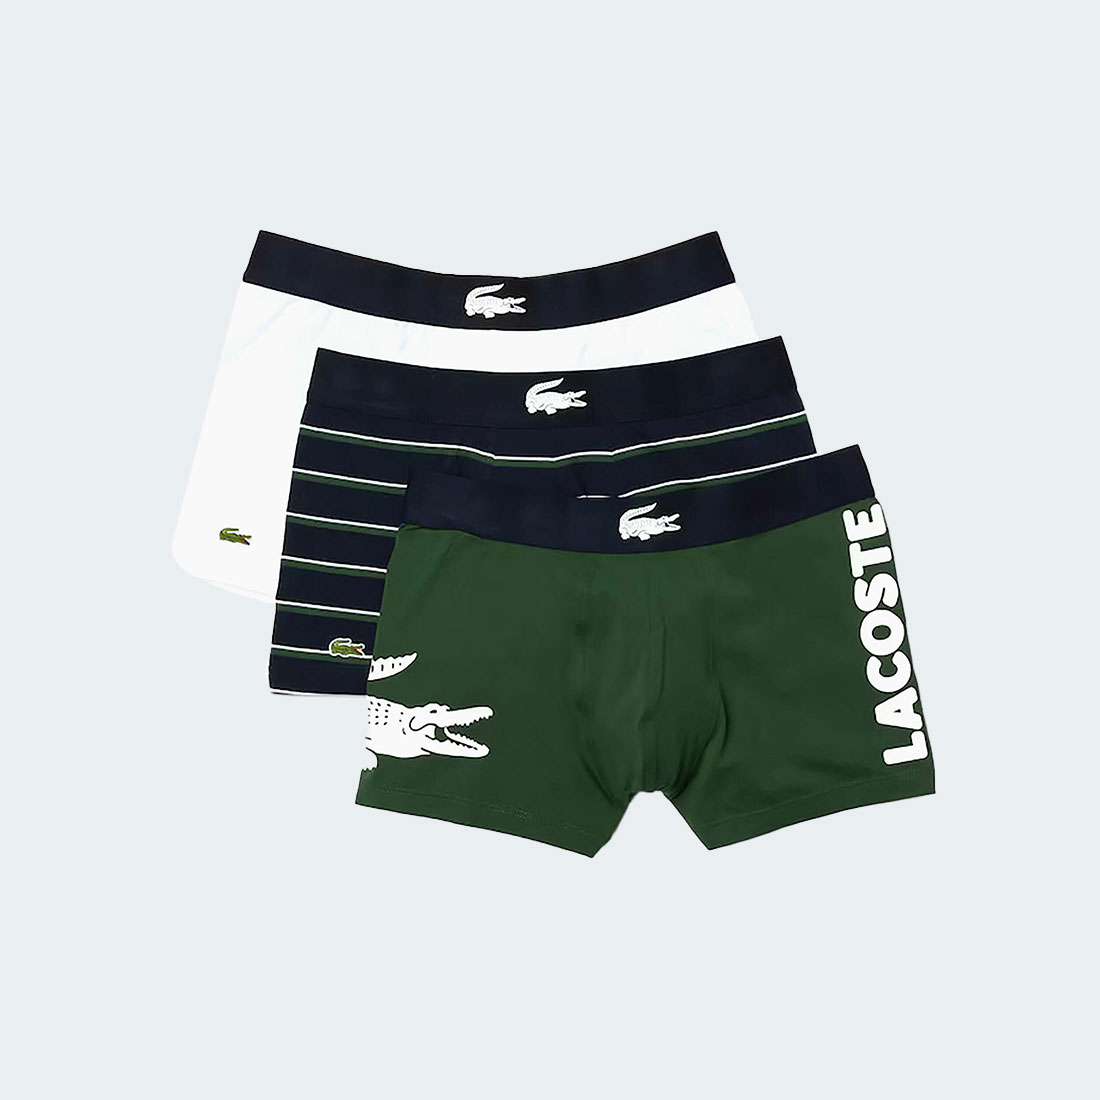 PACK 3 BOXERS LACOSTE 5H1803 THYME/NAVY BLUE